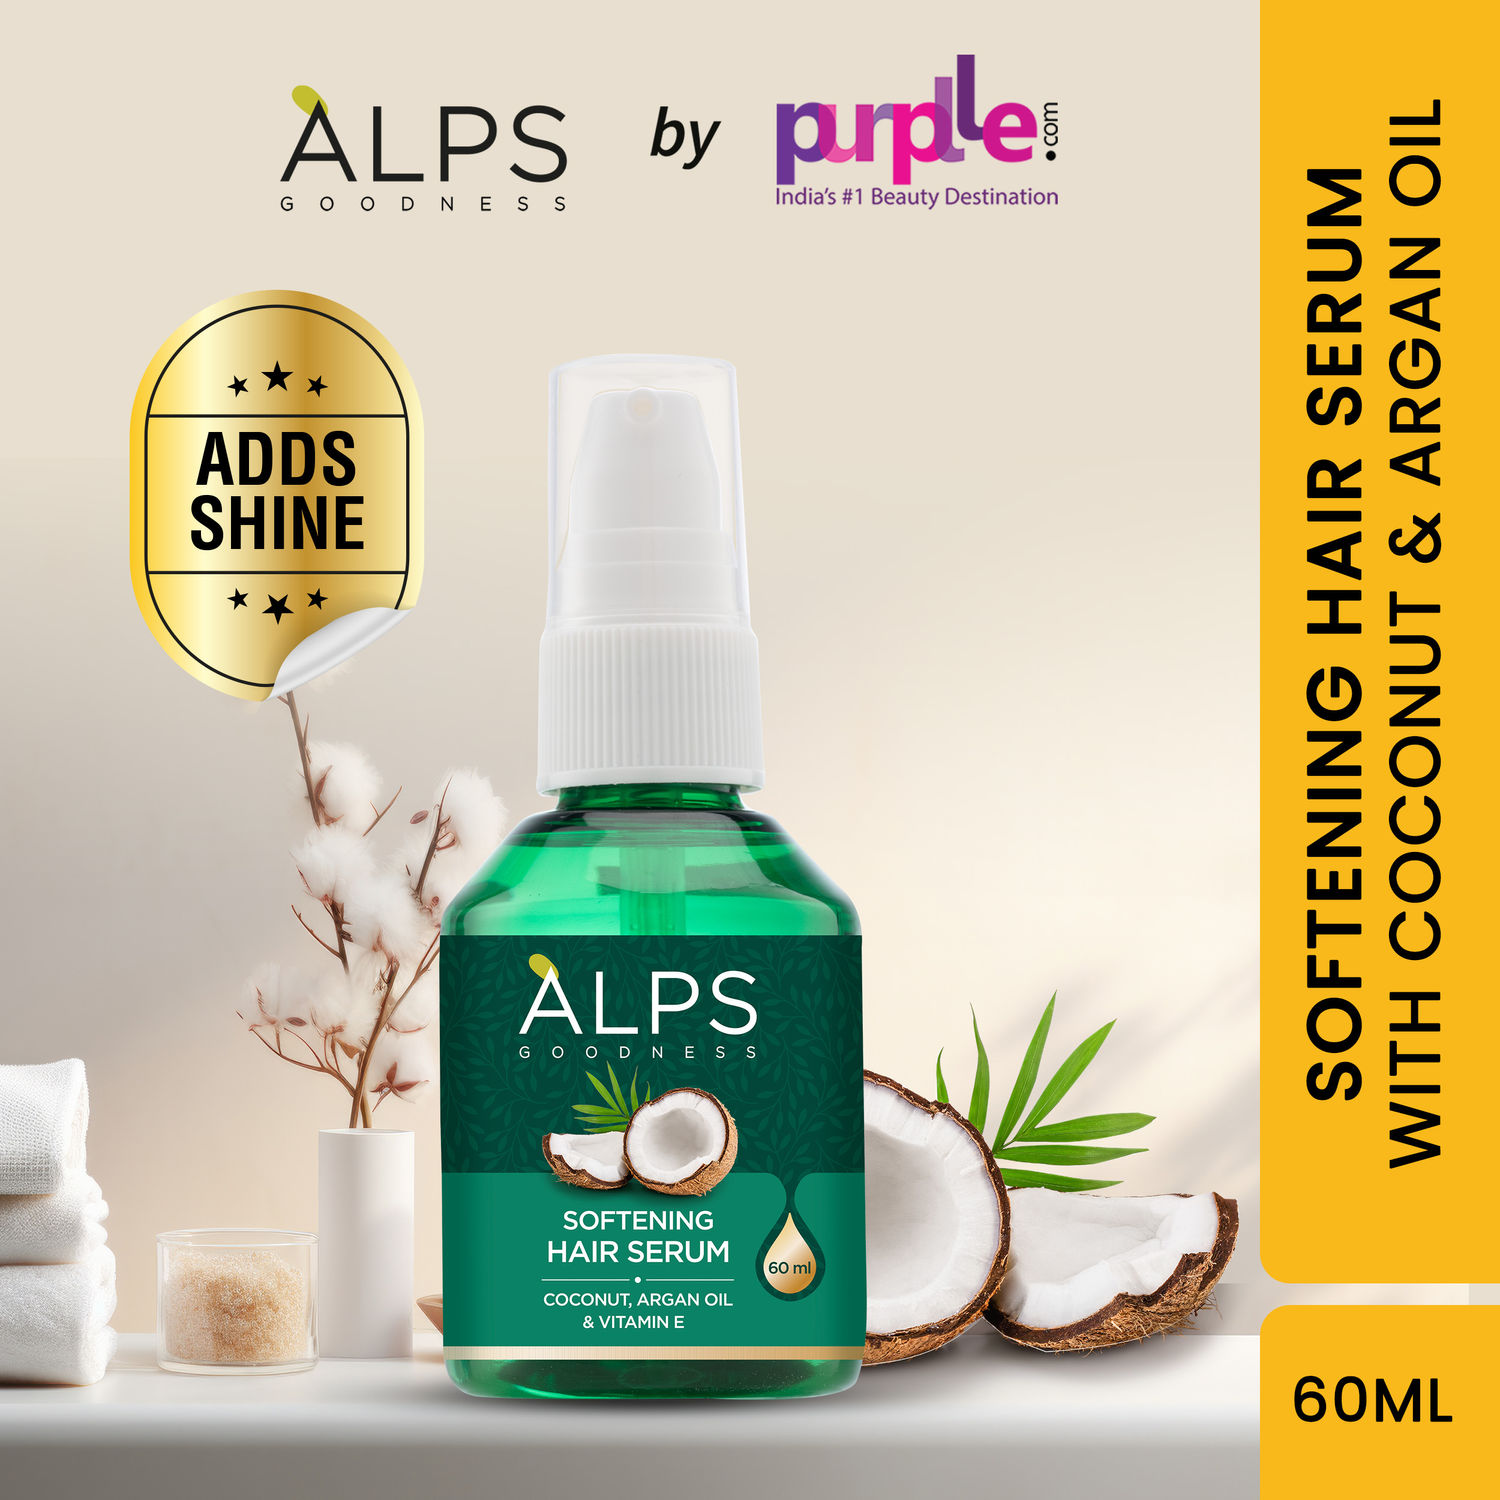 Buy Alps Goodness Softening Hair Serum with Coconut, Argan Oil & Vitamin E (60ml) | For Soft & Frizz-Free Hair | Hair Serum for Smoothening | Adds Shine - Purplle